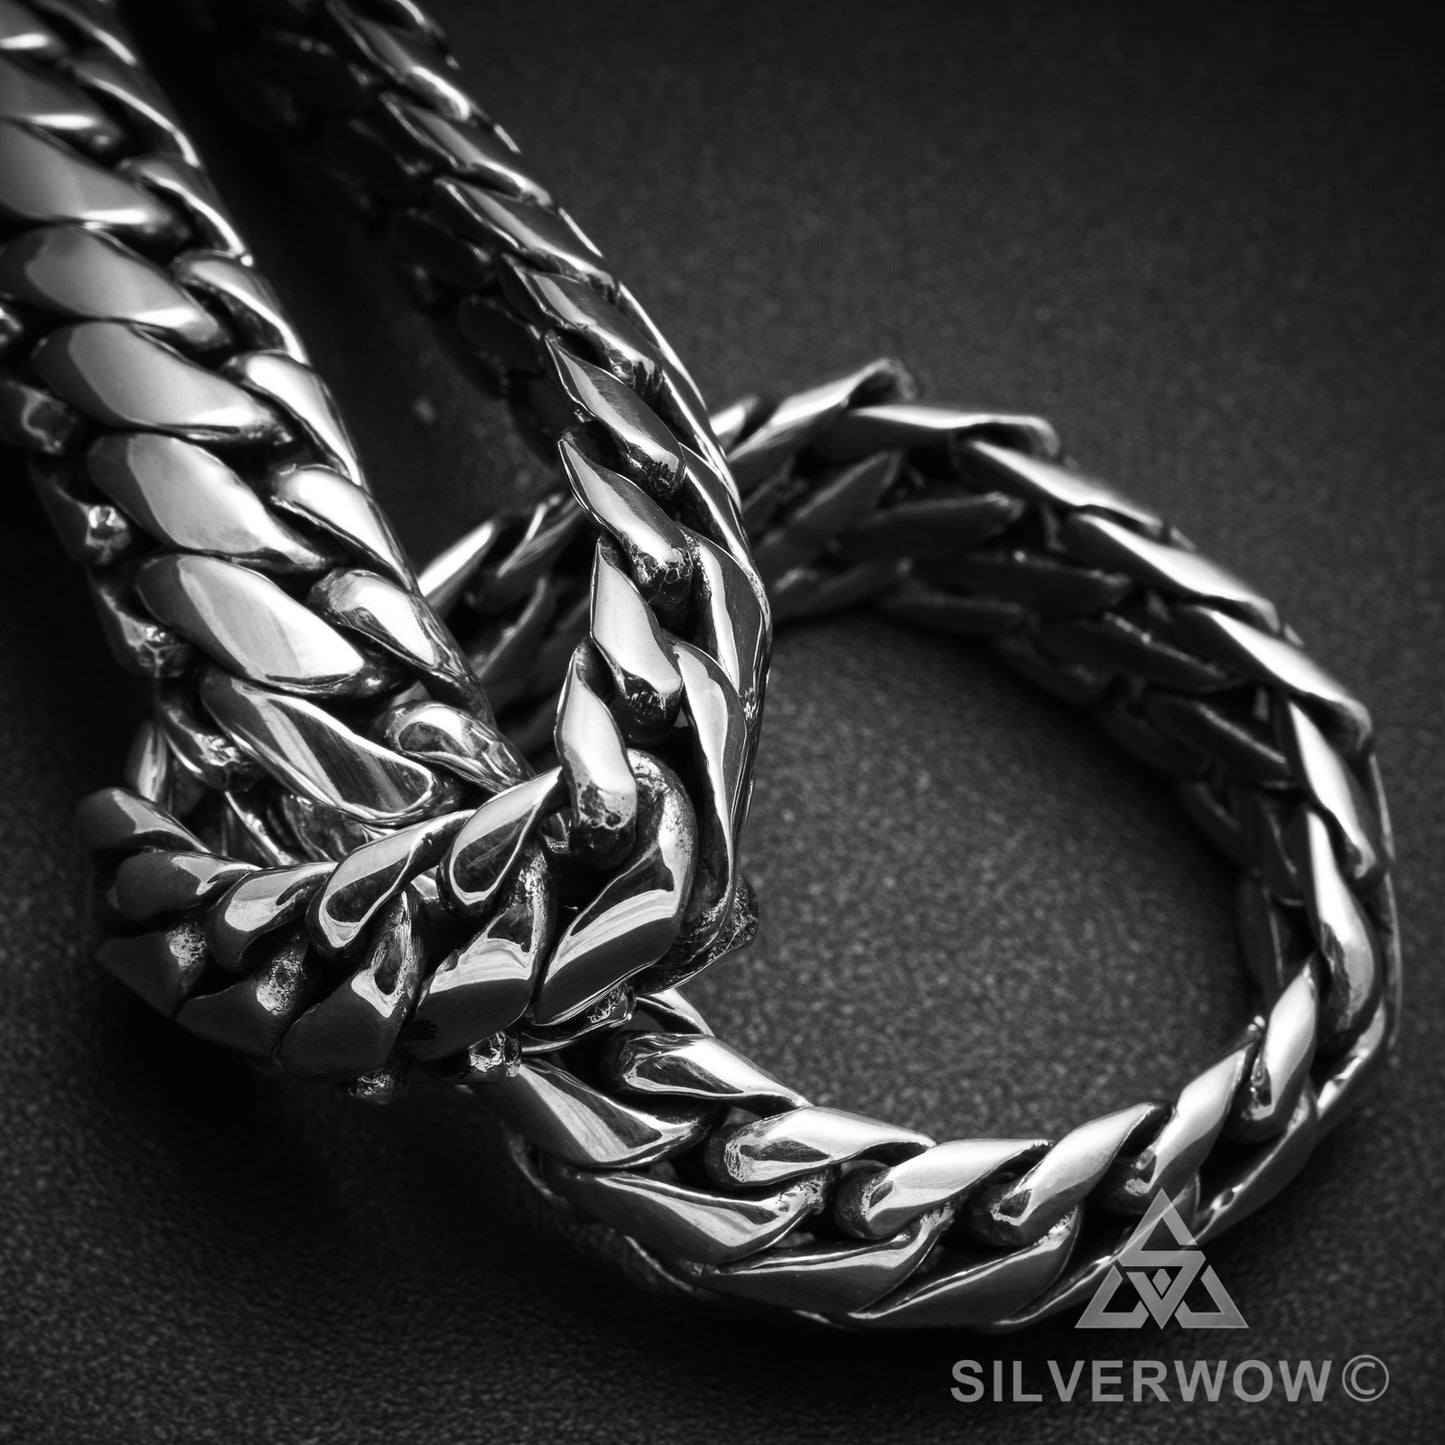 11mm Woven Snake Necklace